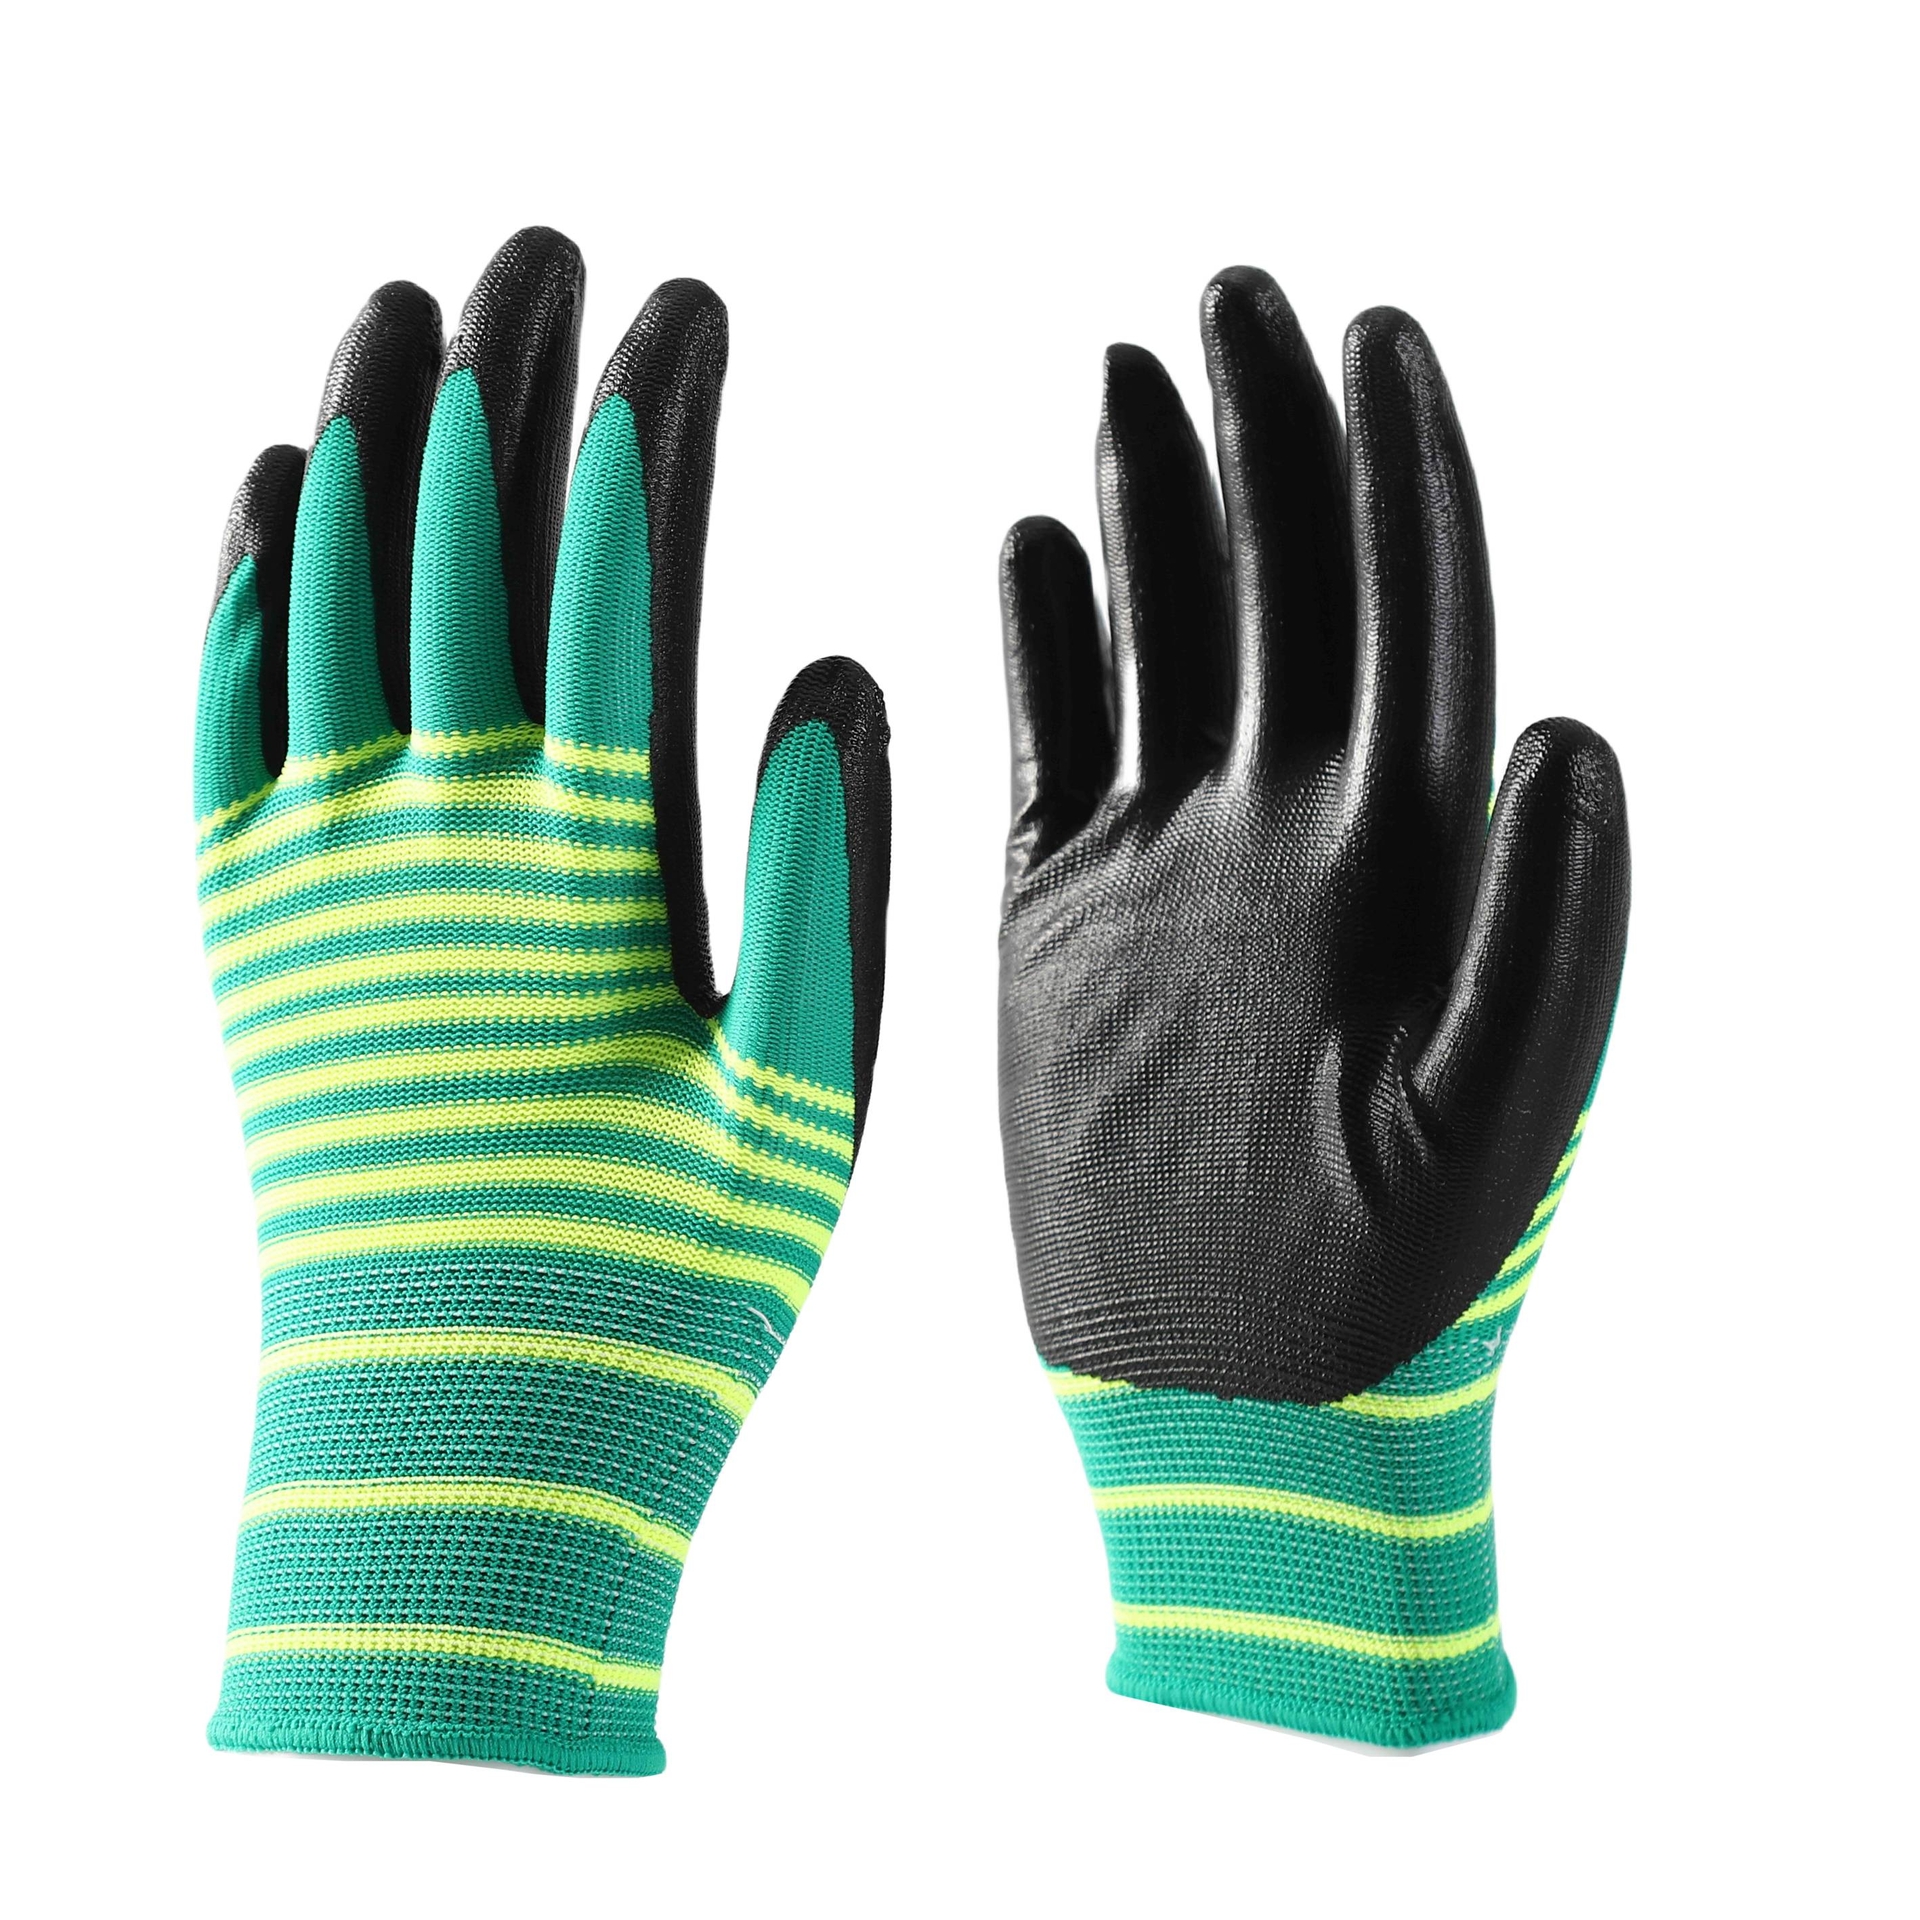                 Pattern polyester with black nitrile coating gloves            